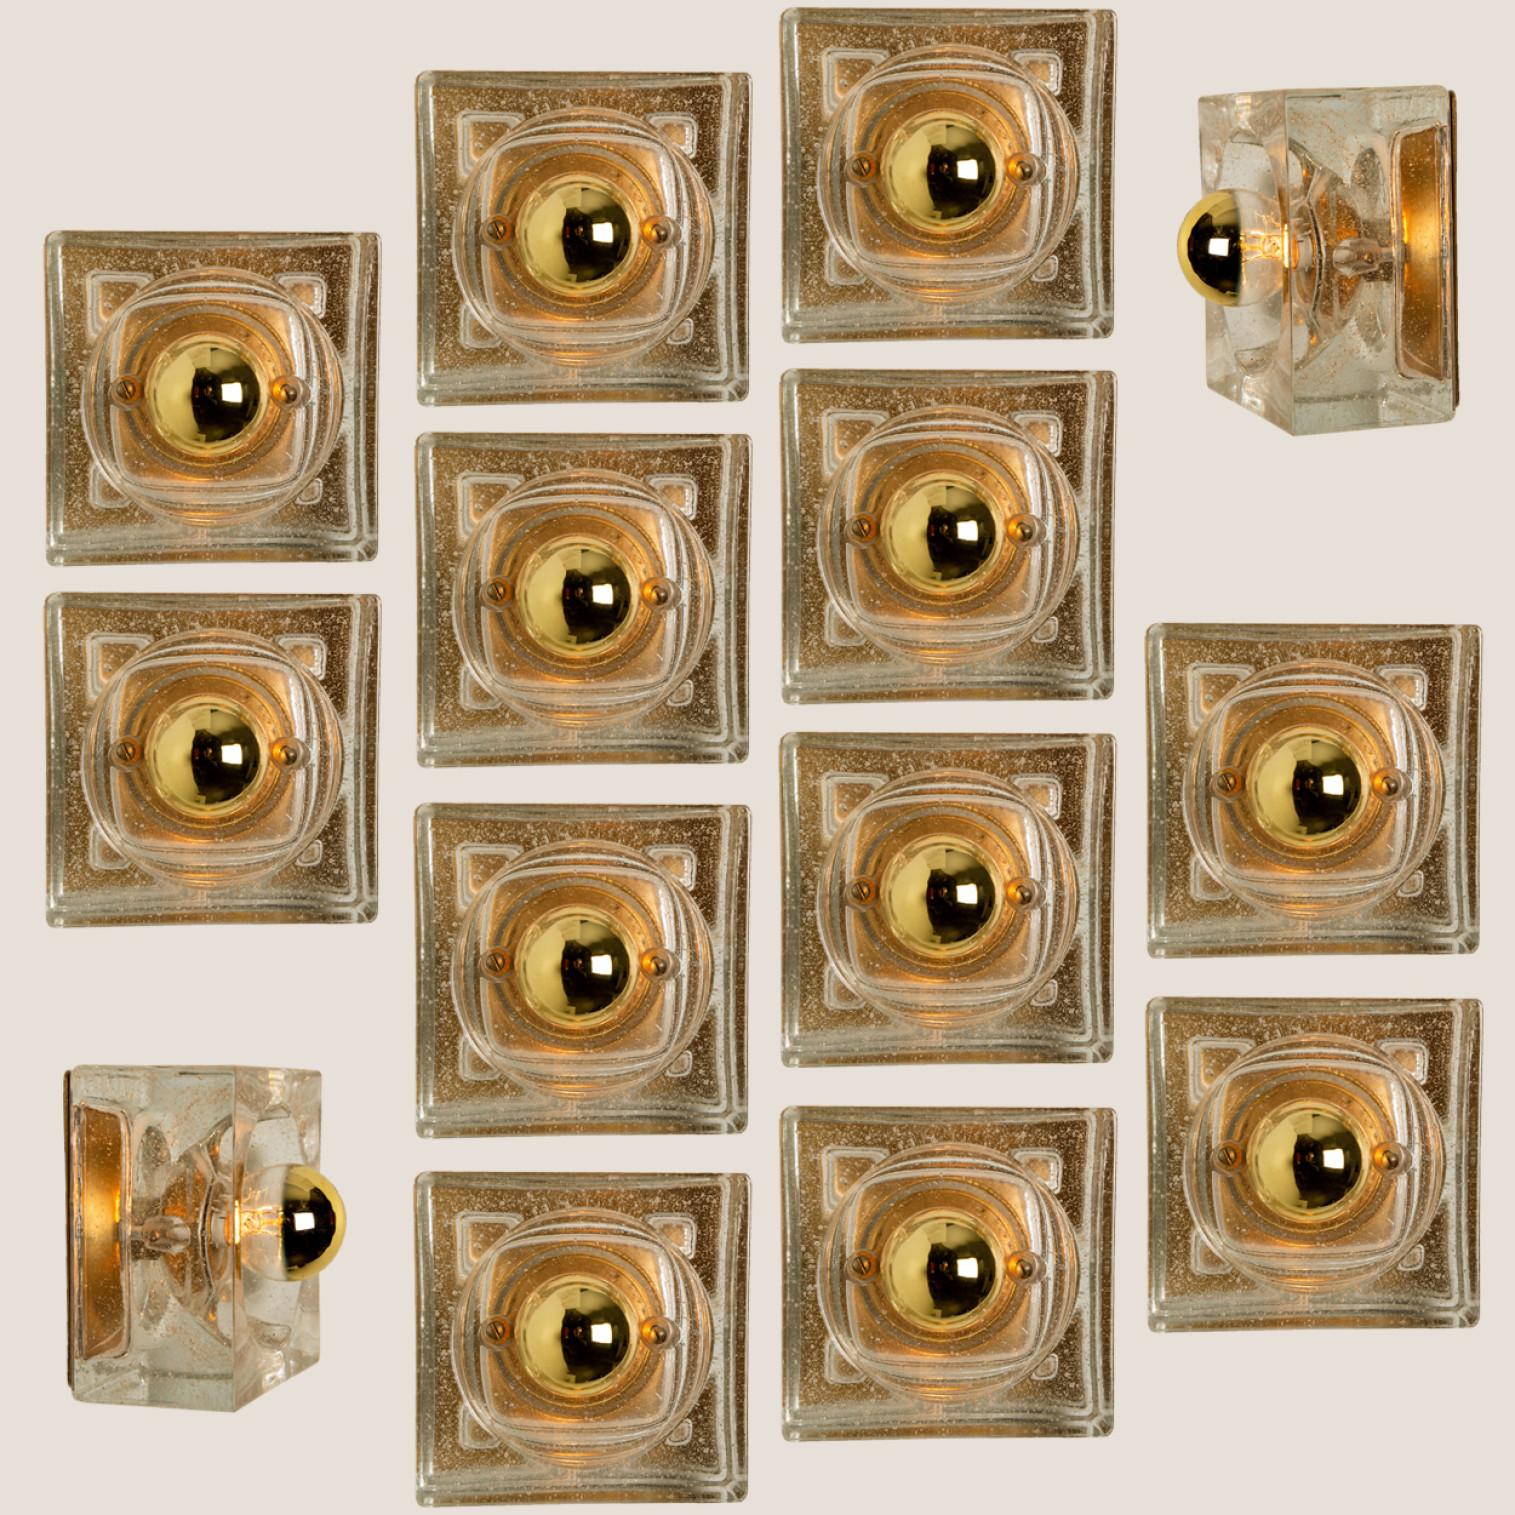 These lights are made from thick blown glass on a square gold colored backplate. The glass causes a nice lighting effect on the ceiling, table or wall. Each lamp has one E14 fitting (Max 25 Watt)

Can work for impressive wall, table or ceiling